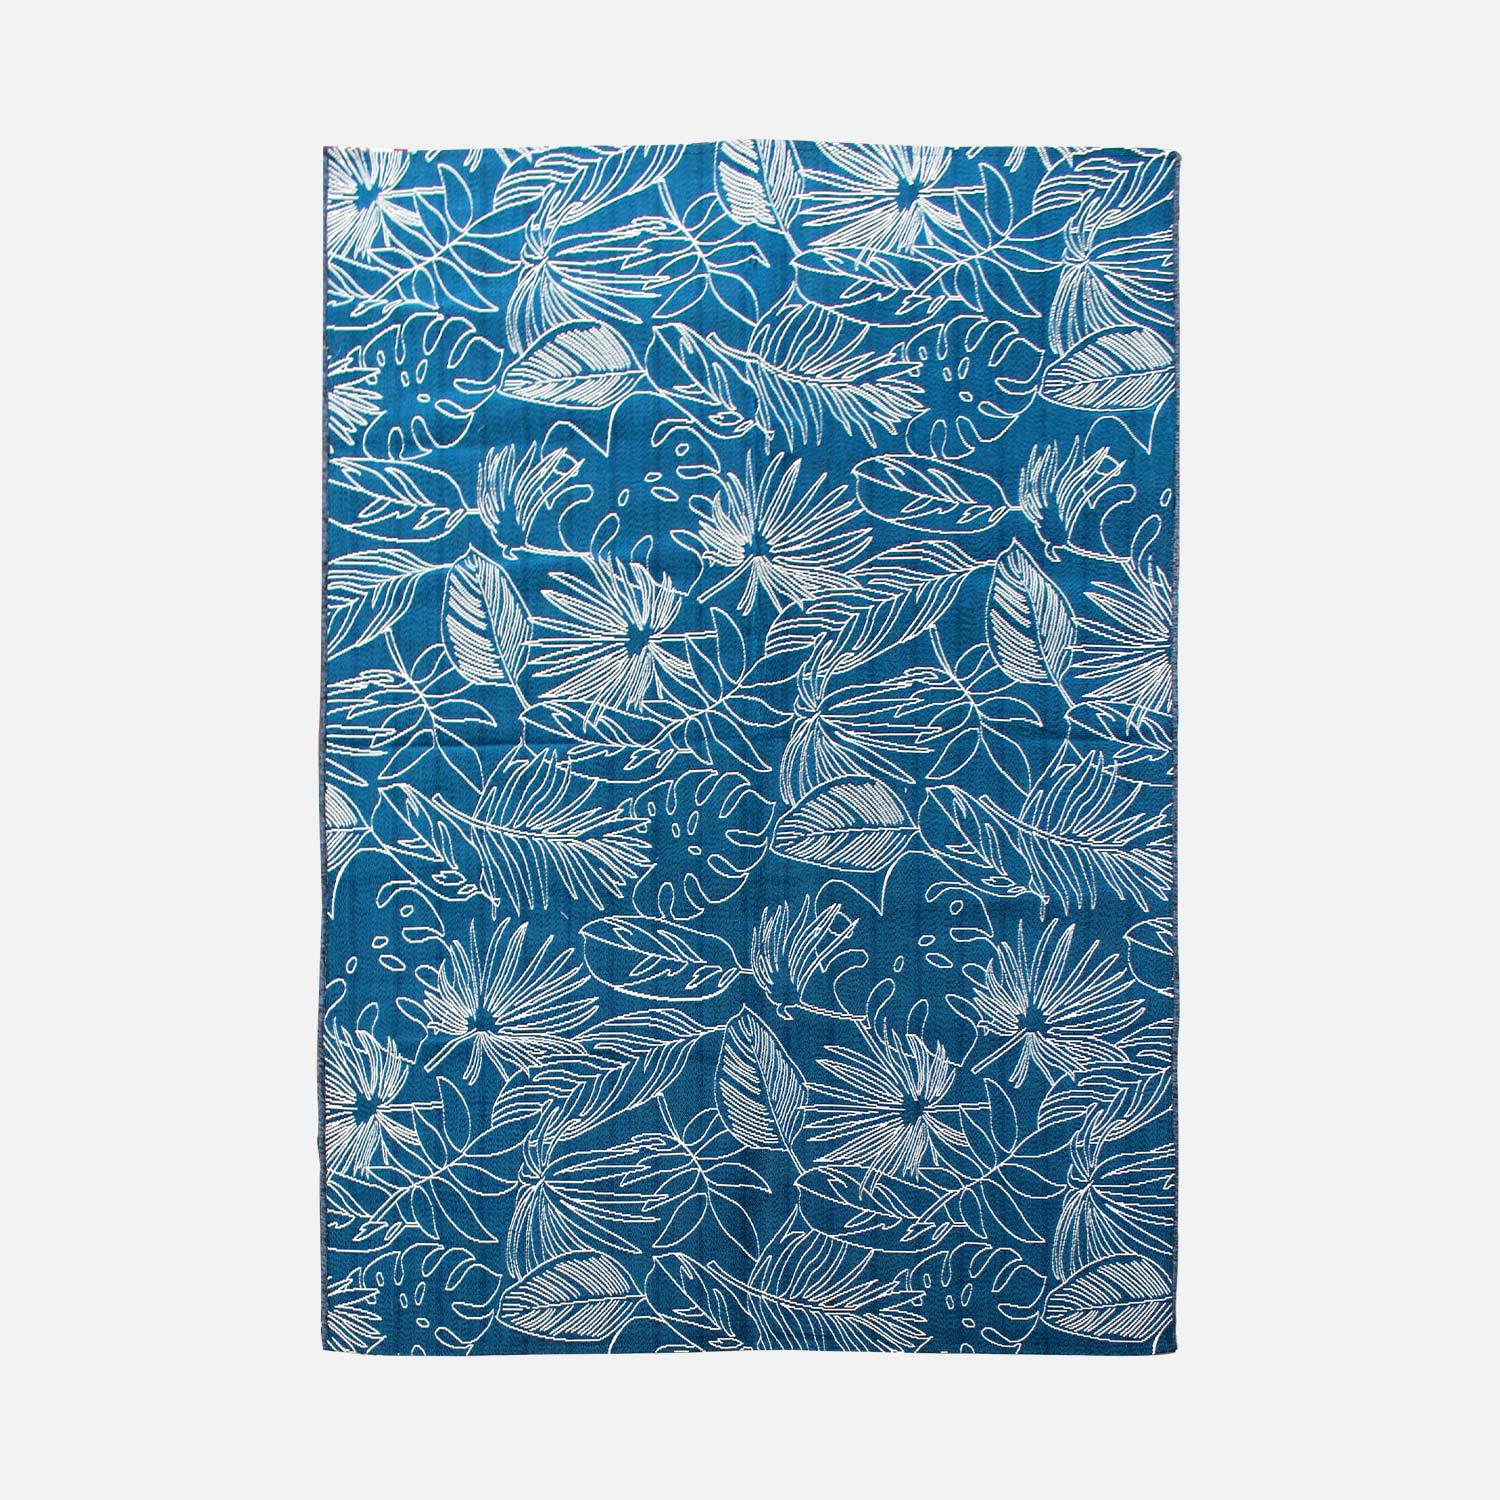 Outdoor rug - 200x290cm - rectangular, indoor/outdoor use - Exotic - Blue and white,sweeek,Photo1